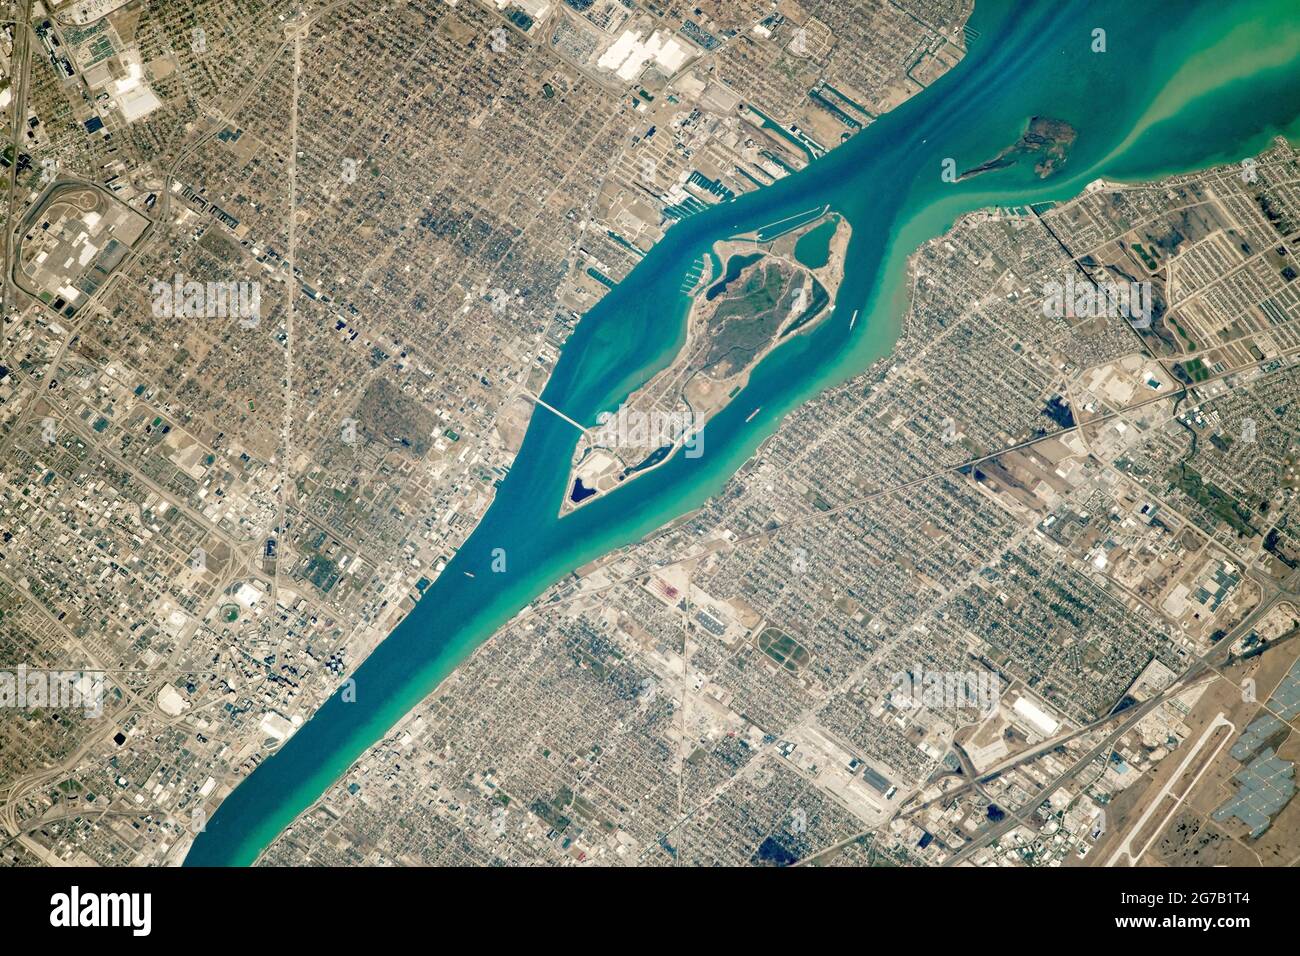 Photographed from the International Space Station (ISS). Belle Isle, an island in the Detroit River, Michigan, USA. The Detroit River stretches approximately 45 kilometers (30 miles) and provides connectivity between the upper Great Lakes and the Saint Lawrence Seaway. In the photo, a few large ships are visible passing along the narrow strait. The river serves as the international border between the United States and Canada. On the U.S. side of the river lies Michigan's most populous city, Detroit. An optimised and digitally enhanced version of an NASA image / credit NASA Stock Photo